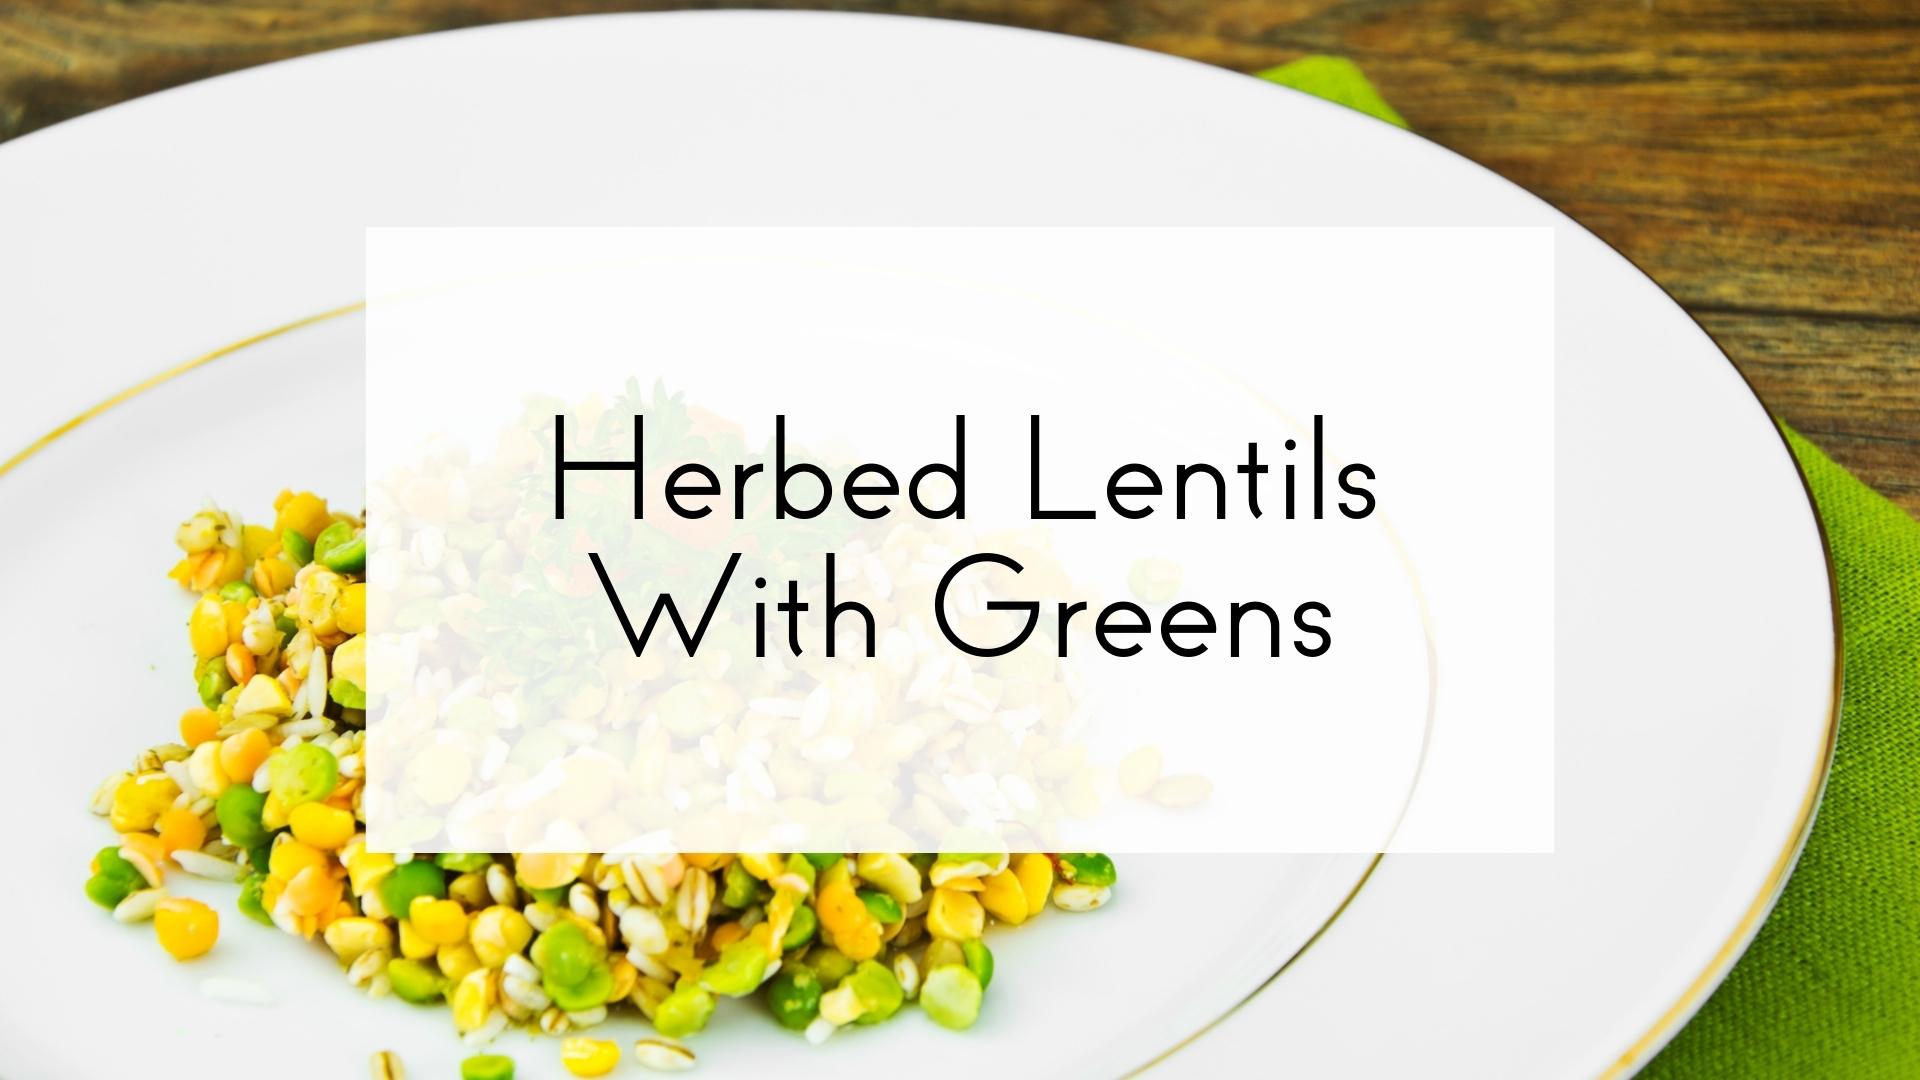 Herbed Lentils with Greens